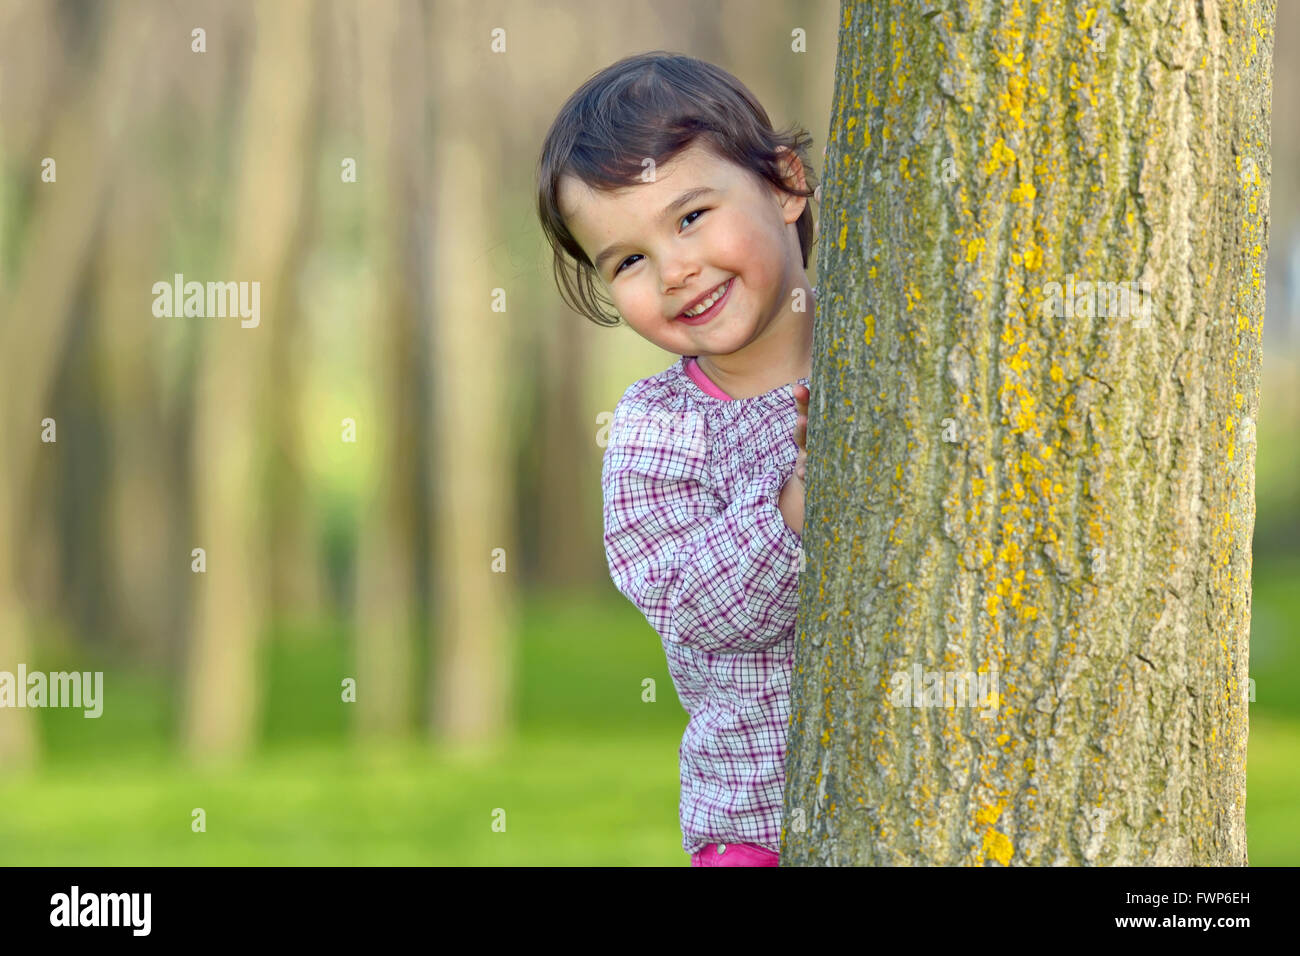 Little girl hiding behind a tree in a forest Stock Photo